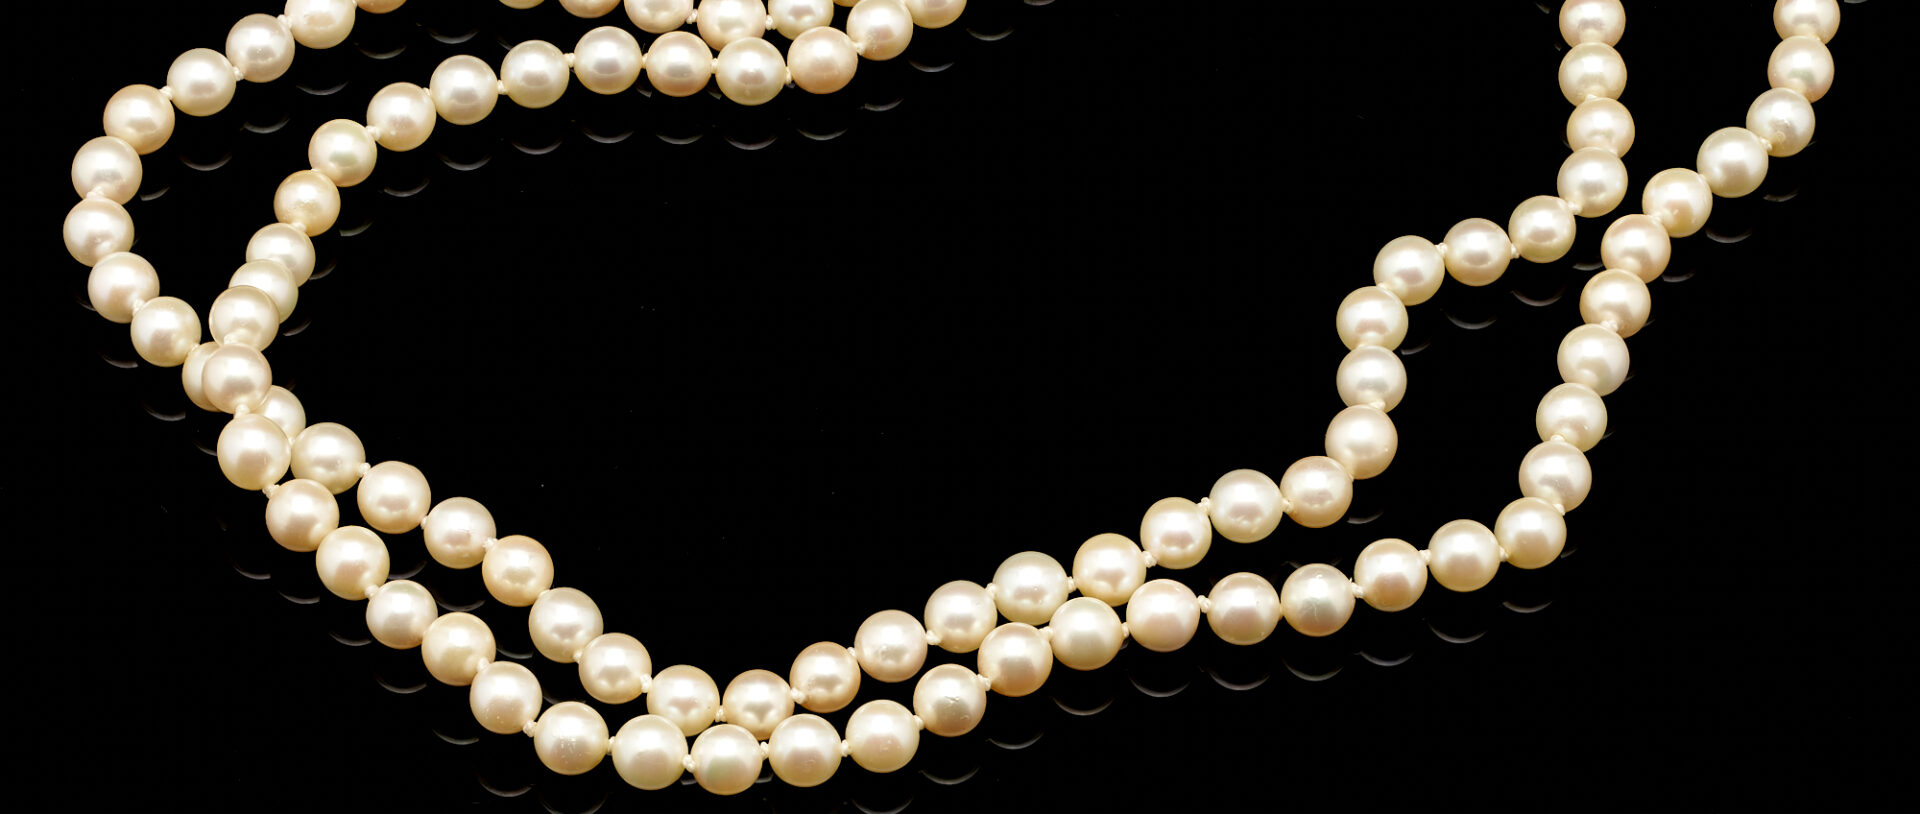 Lot 1120: 14K Double Row Pearl Necklace